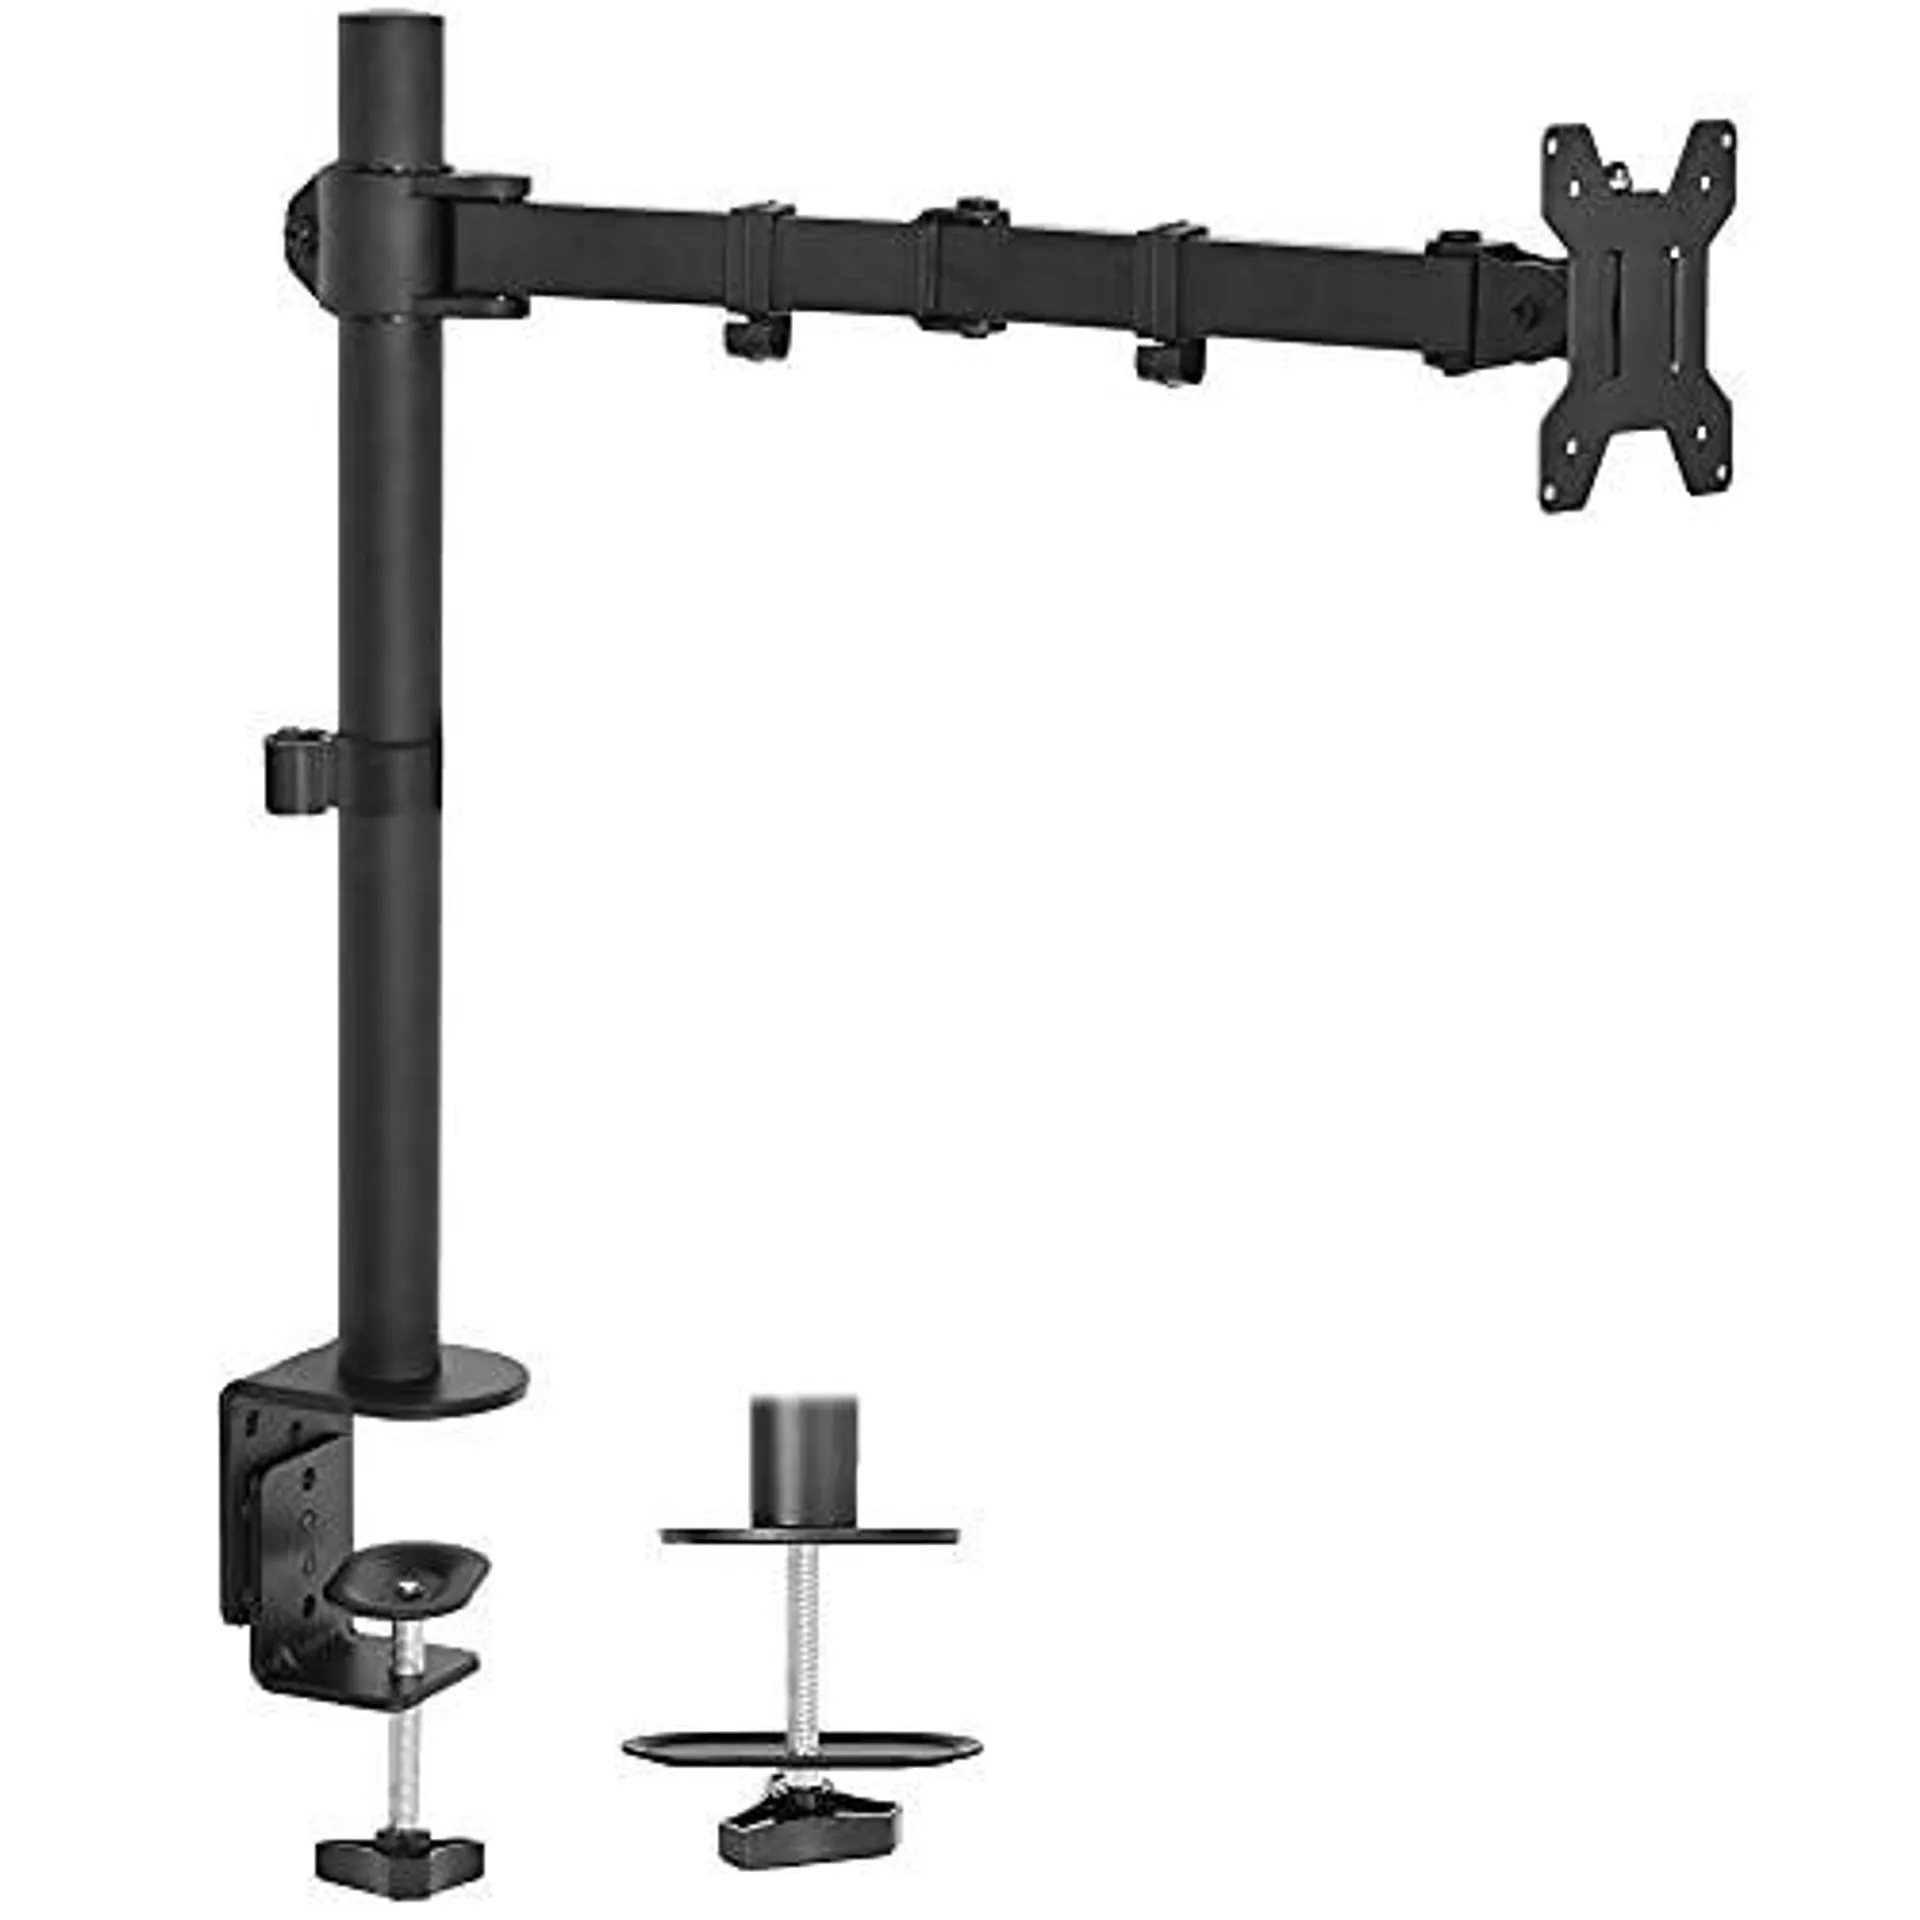 vivo single monitor desk mount, fully adjustable monitor arm stand with clamp and grommet base, tilt, swivel, rotation - hold